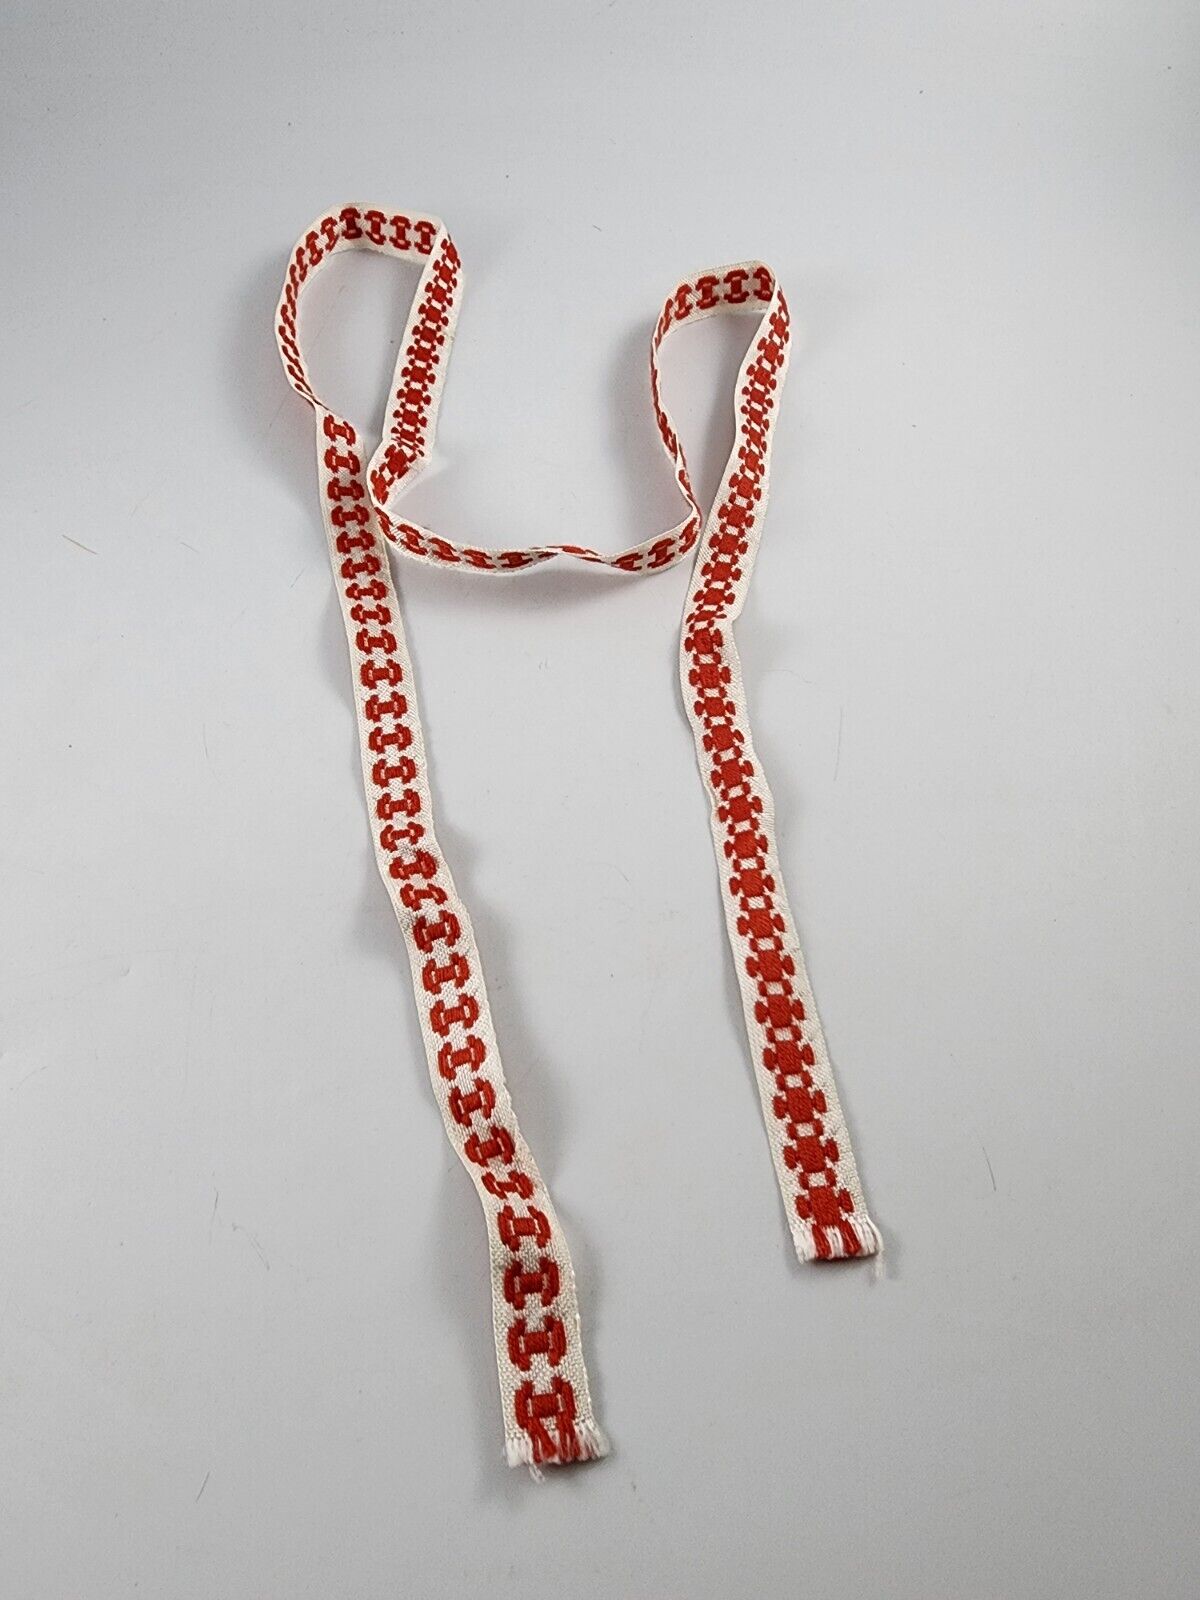 Lithuanian Woven Sash Red and White Design 5/8\